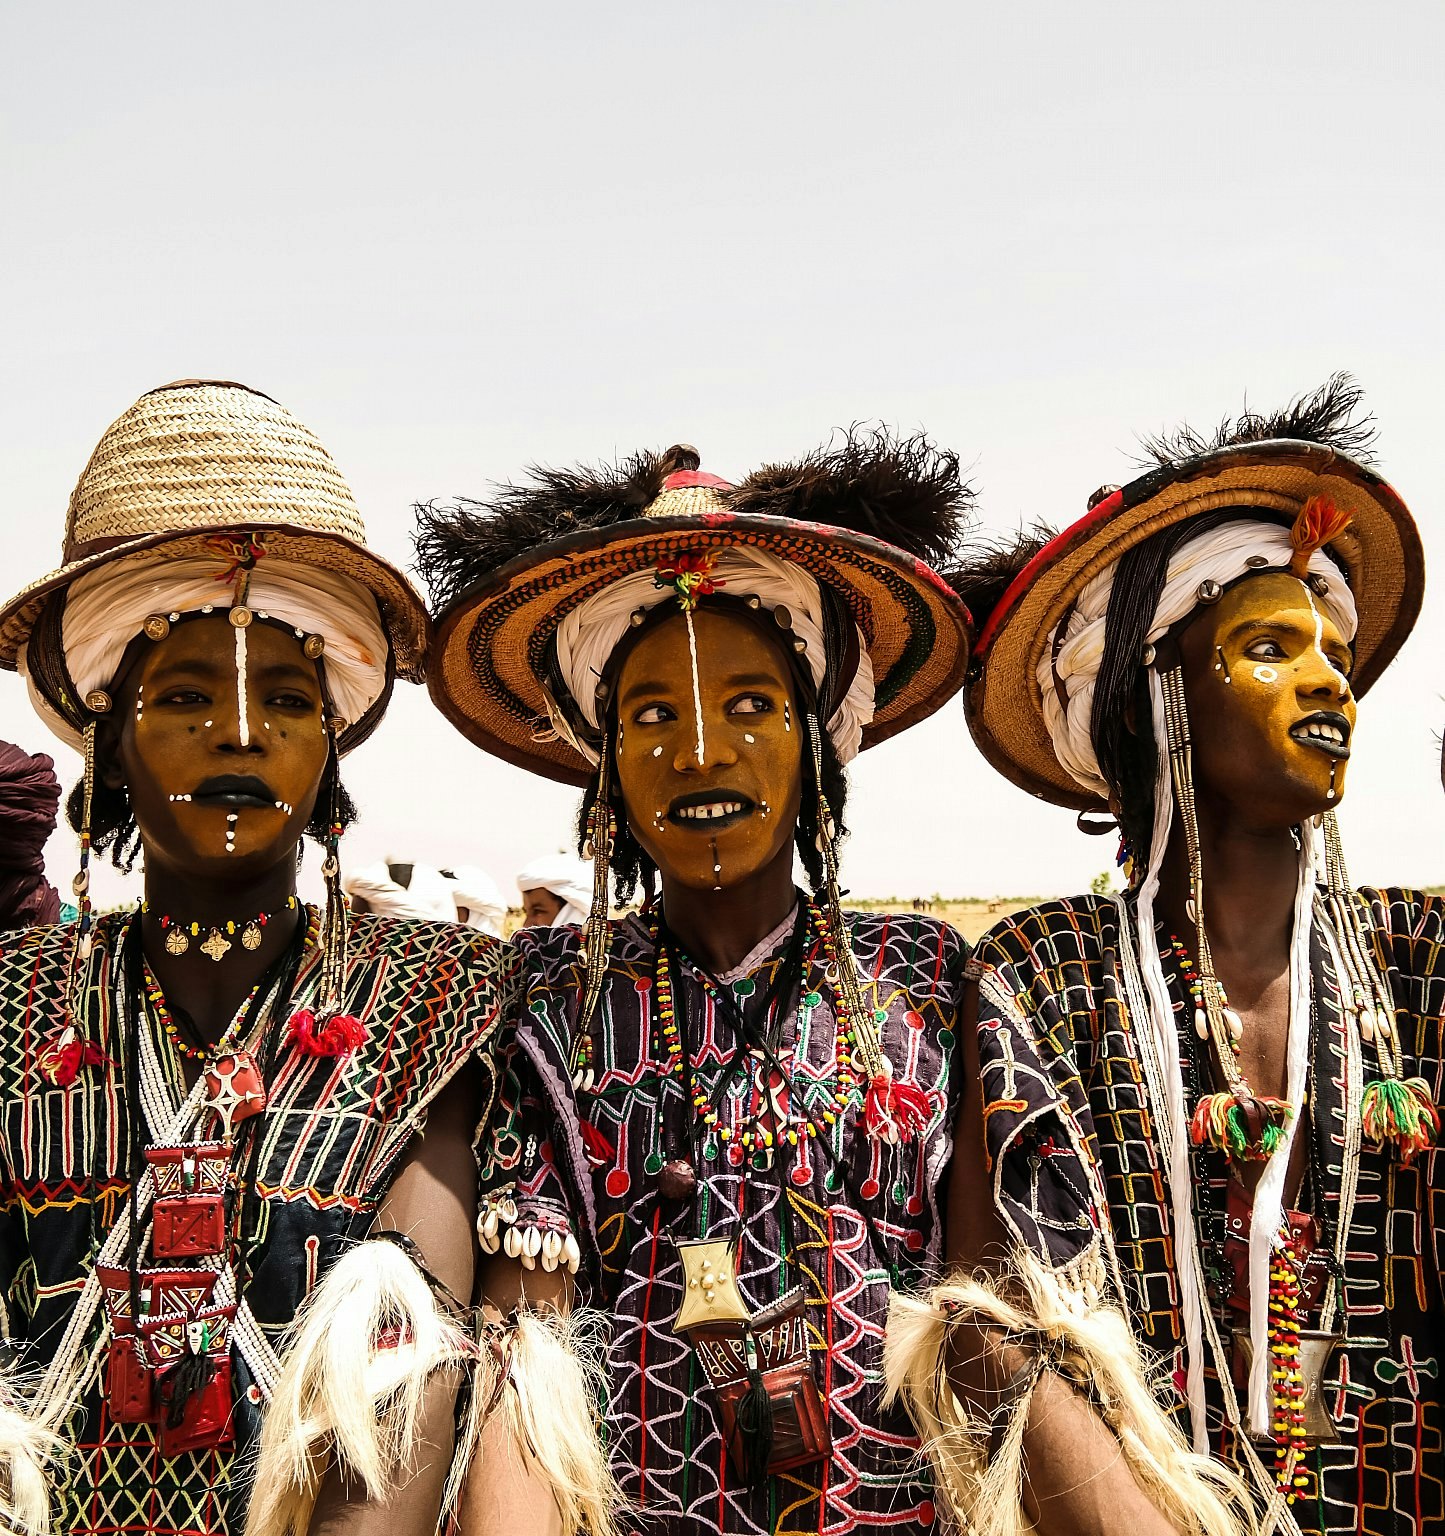 Men in costumes and makeup performing at the Gerewol Festival in Niger.